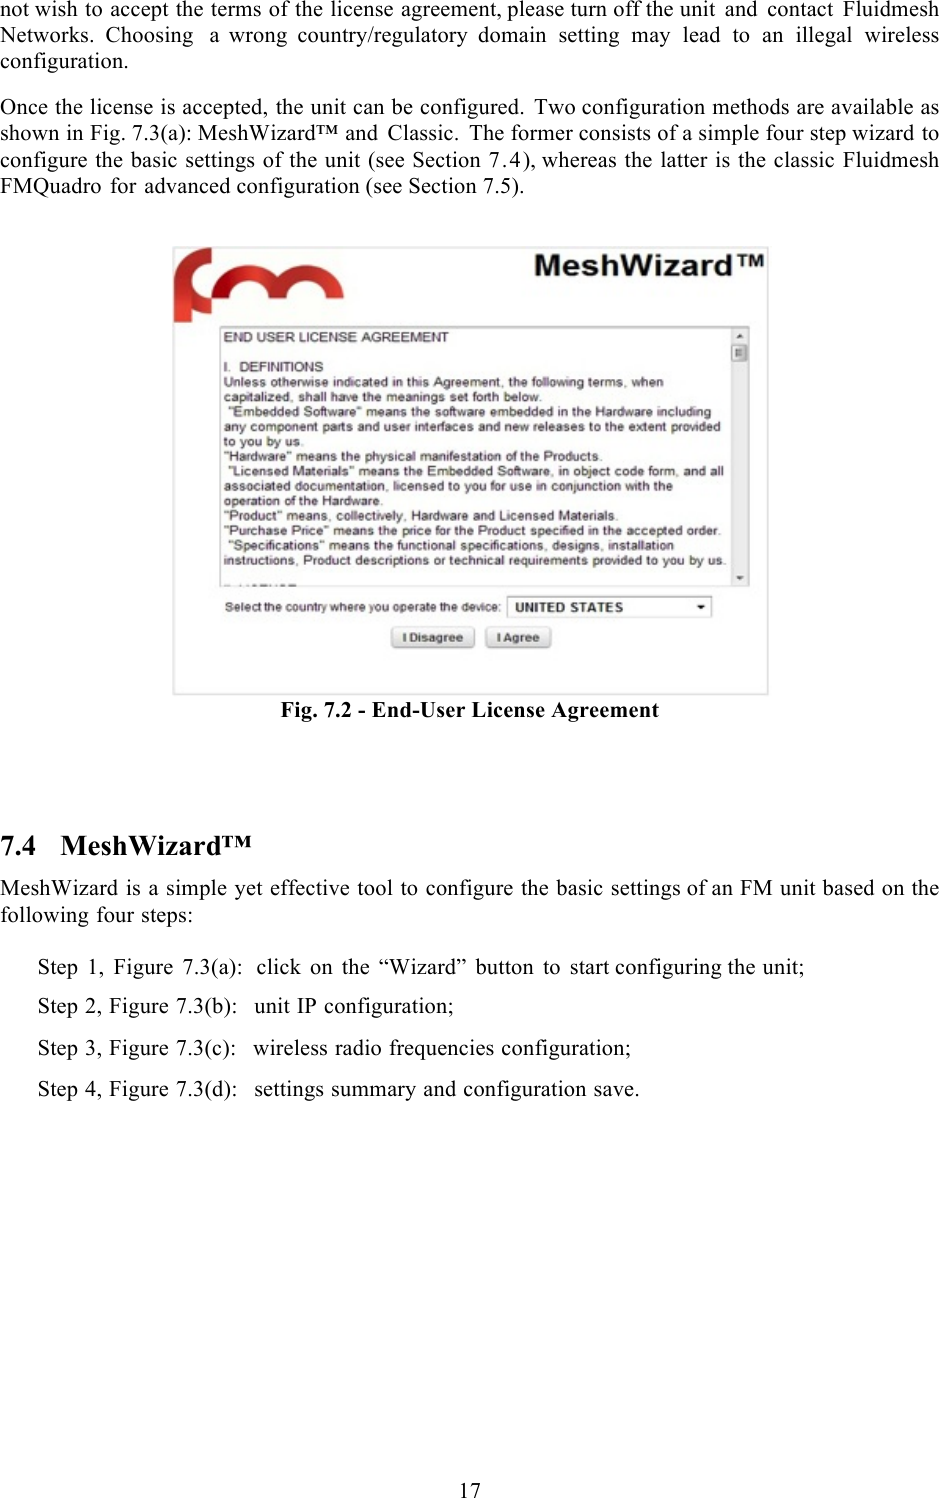  17  not wish to accept the terms of the license agreement, please turn off the unit and contact Fluidmesh Networks. Choosing a  wrong country/regulatory domain setting may lead to an illegal wireless configuration.  Once the license is accepted, the unit can be configured. Two configuration methods are available as shown in Fig. 7.3(a): MeshWizard™ and Classic. The former consists of a simple four step wizard to configure the basic settings of the unit (see Section 7.4), whereas the latter is the classic Fluidmesh FMQuadro for advanced configuration (see Section 7.5).    Fig. 7.2 - End-User License Agreement   7.4 MeshWizard™ MeshWizard is a simple yet effective tool to configure the basic settings of an FM unit based on the following four steps:  Step 1, Figure 7.3(a):  click on the “Wizard” button to start configuring the unit;  Step 2, Figure 7.3(b):  unit IP configuration;  Step 3, Figure 7.3(c):  wireless radio frequencies configuration;  Step 4, Figure 7.3(d):  settings summary and configuration save.   